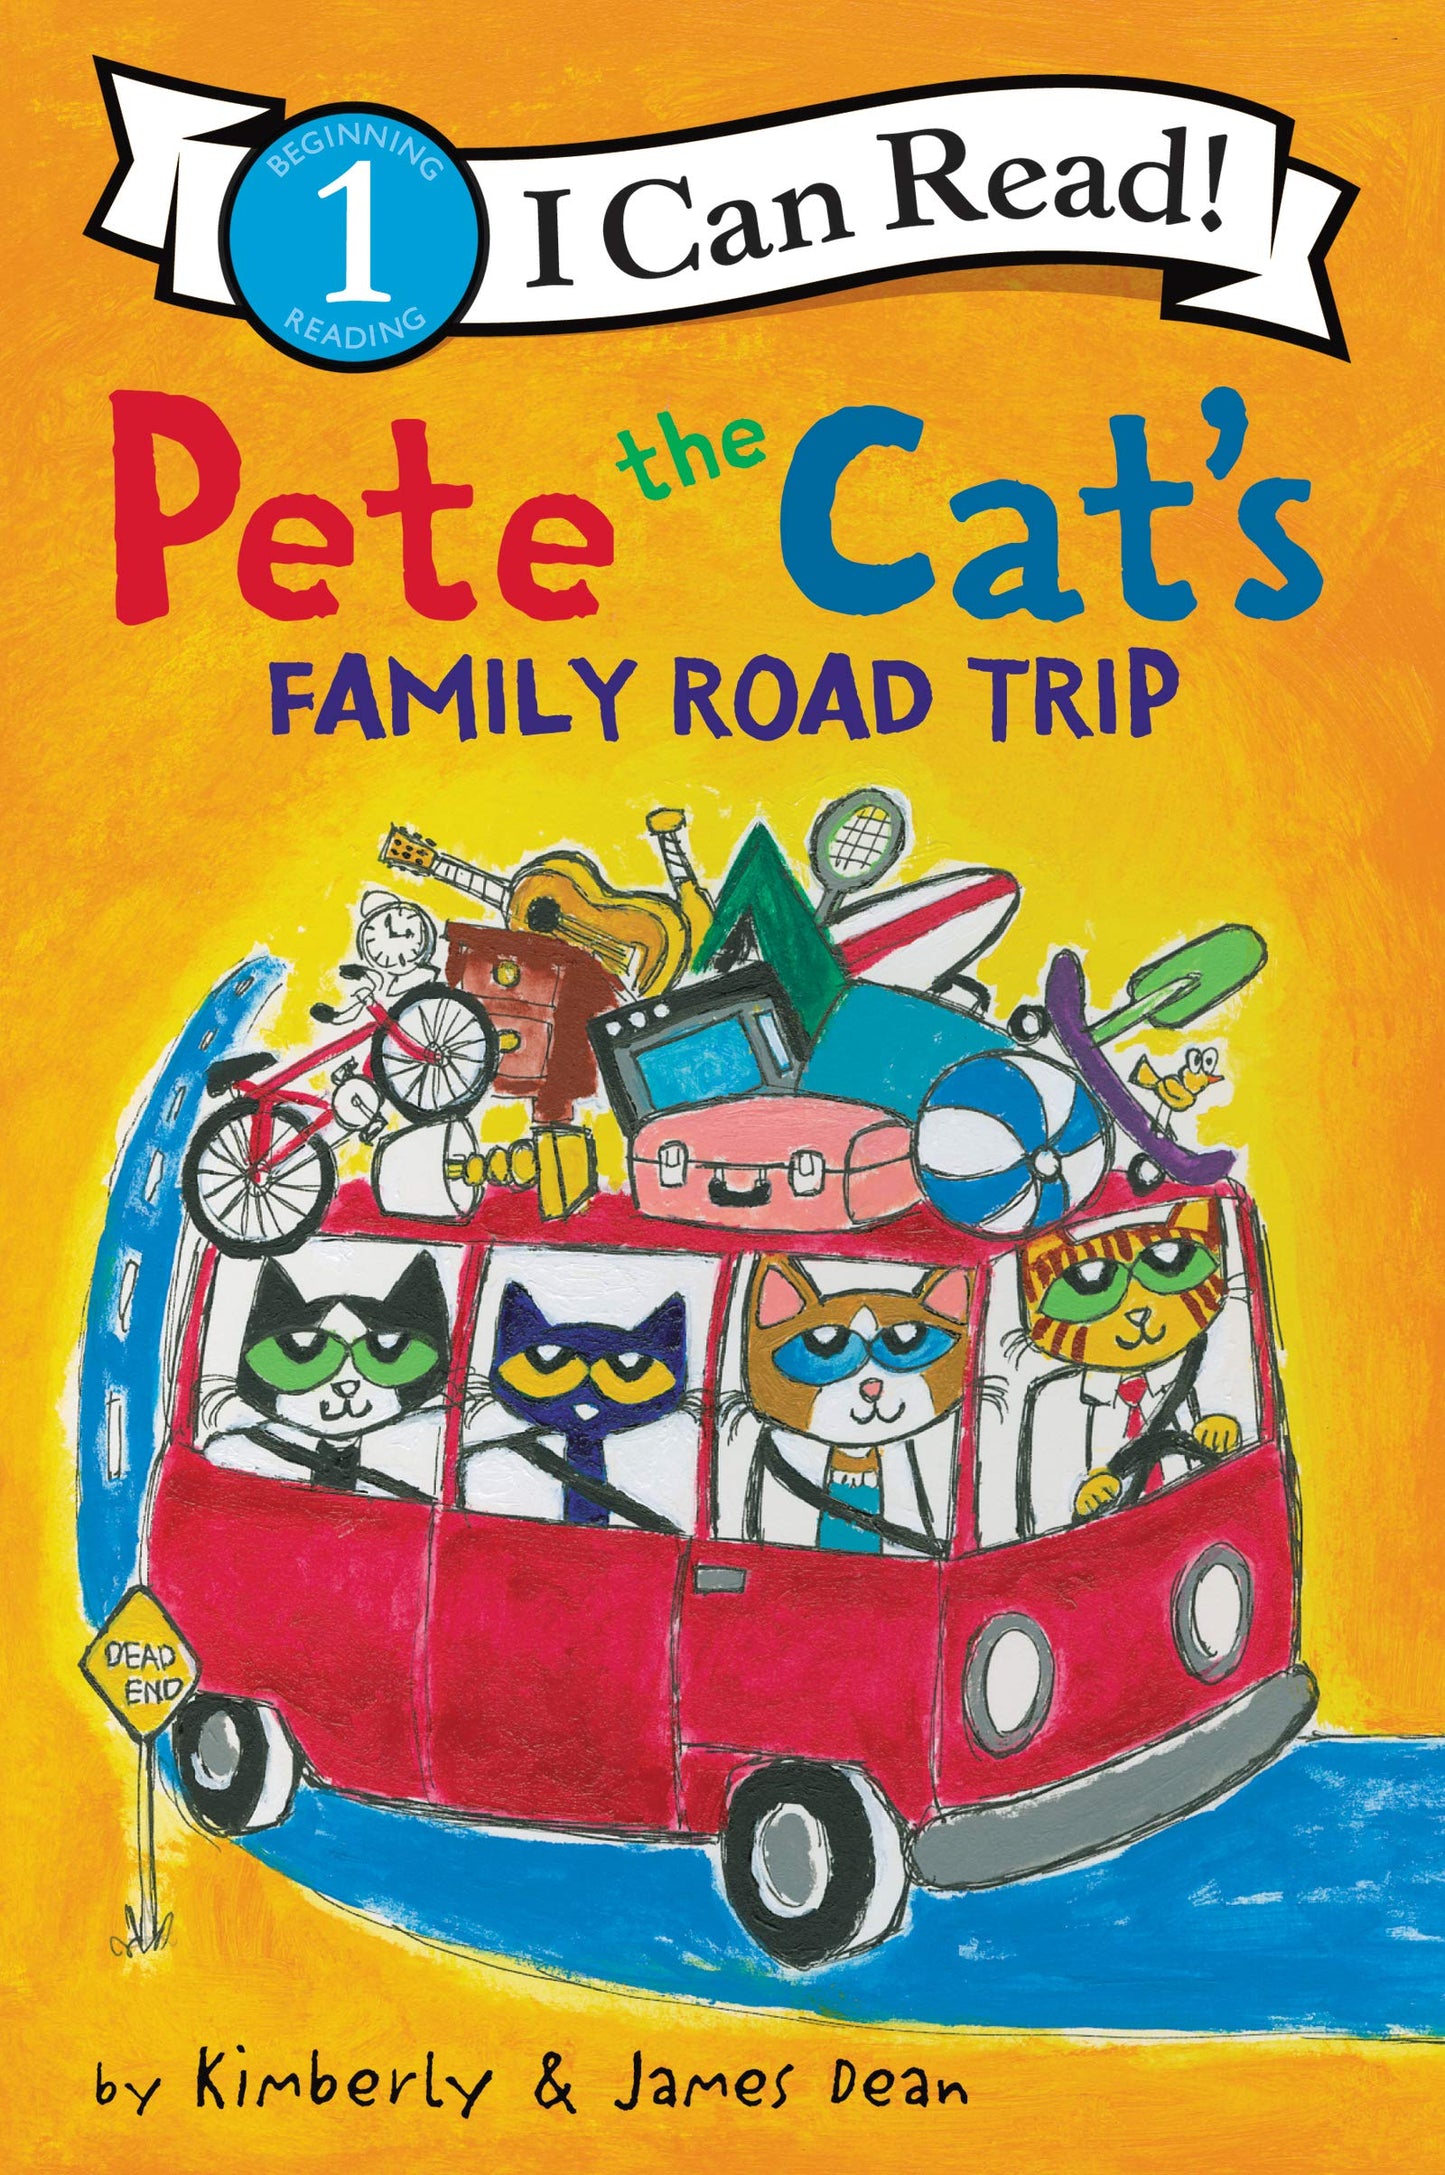 Pete the Cat's Family Road Trip - Level 1 - I Can Read Books